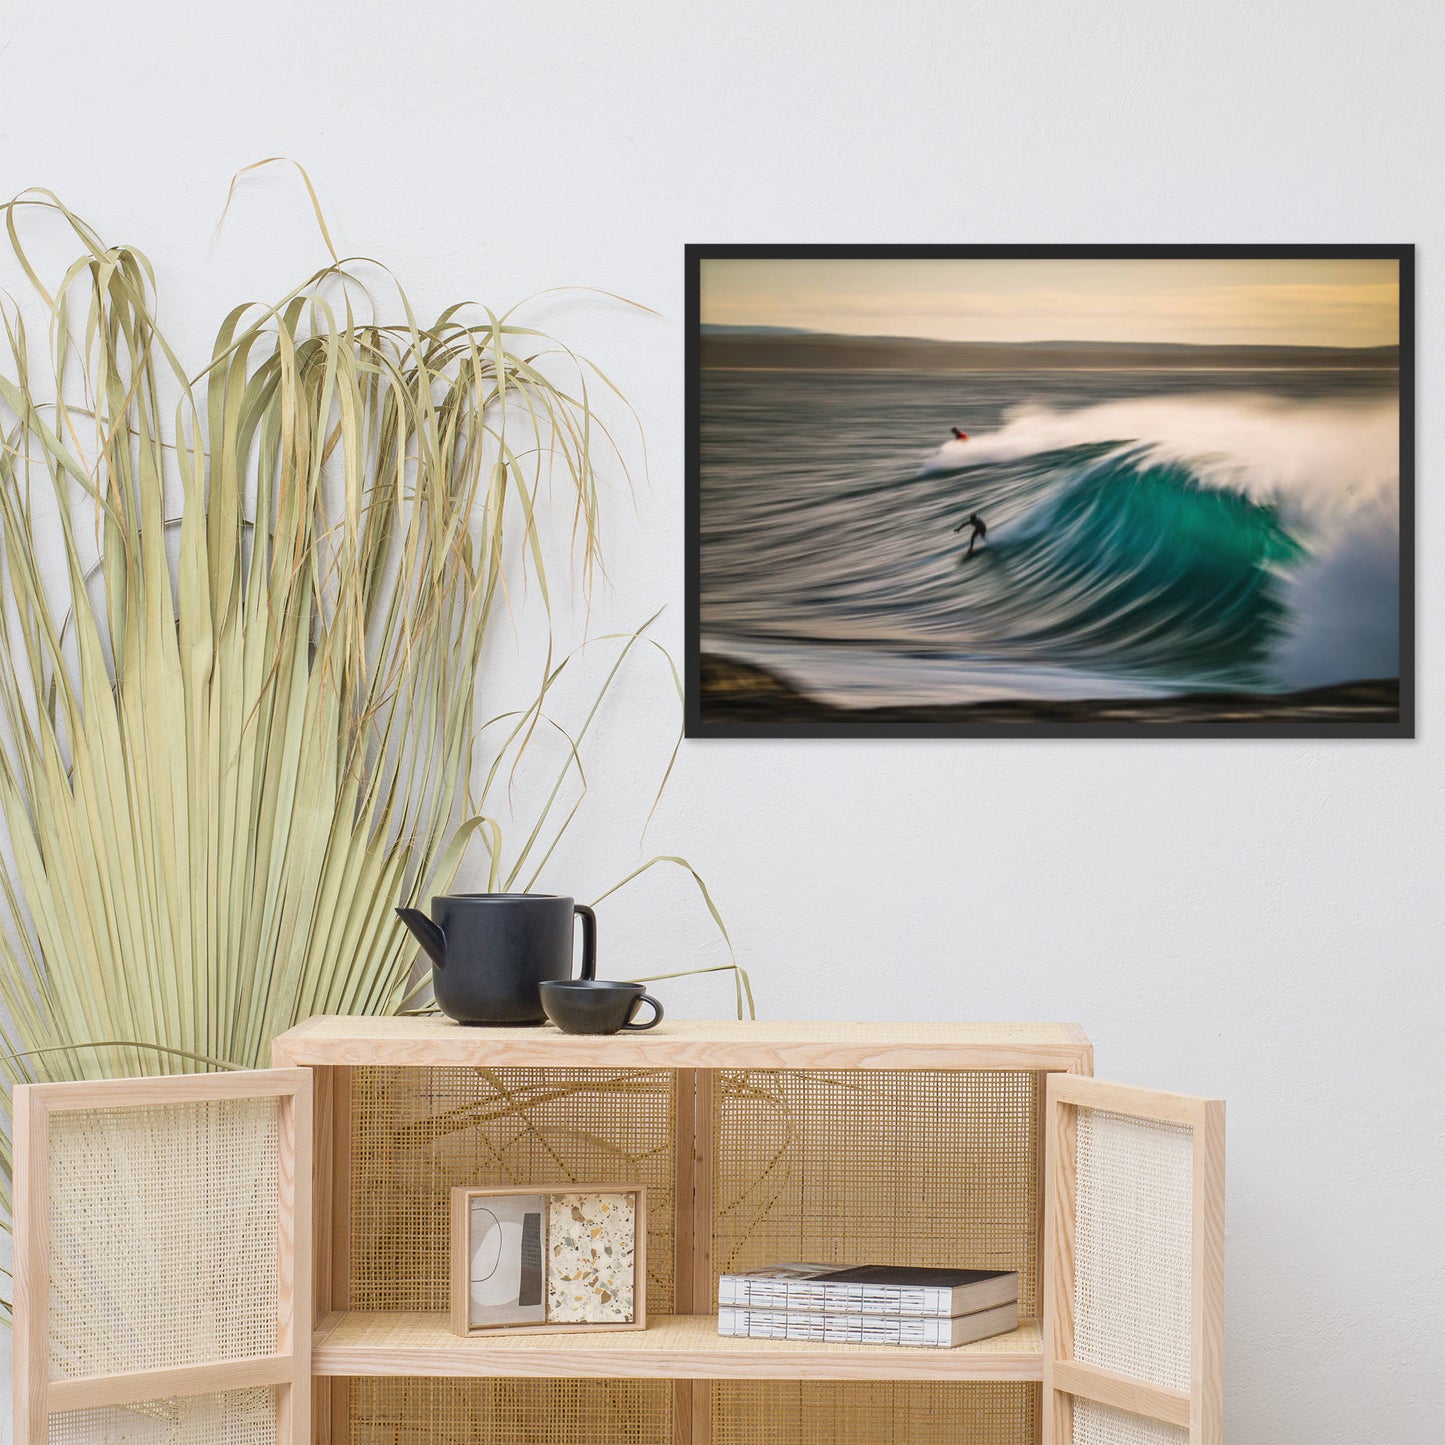 A Surfer's Dance with Light Coastal Lifestyle / Abstract / Landscape Photograph Framed Wall Art Print